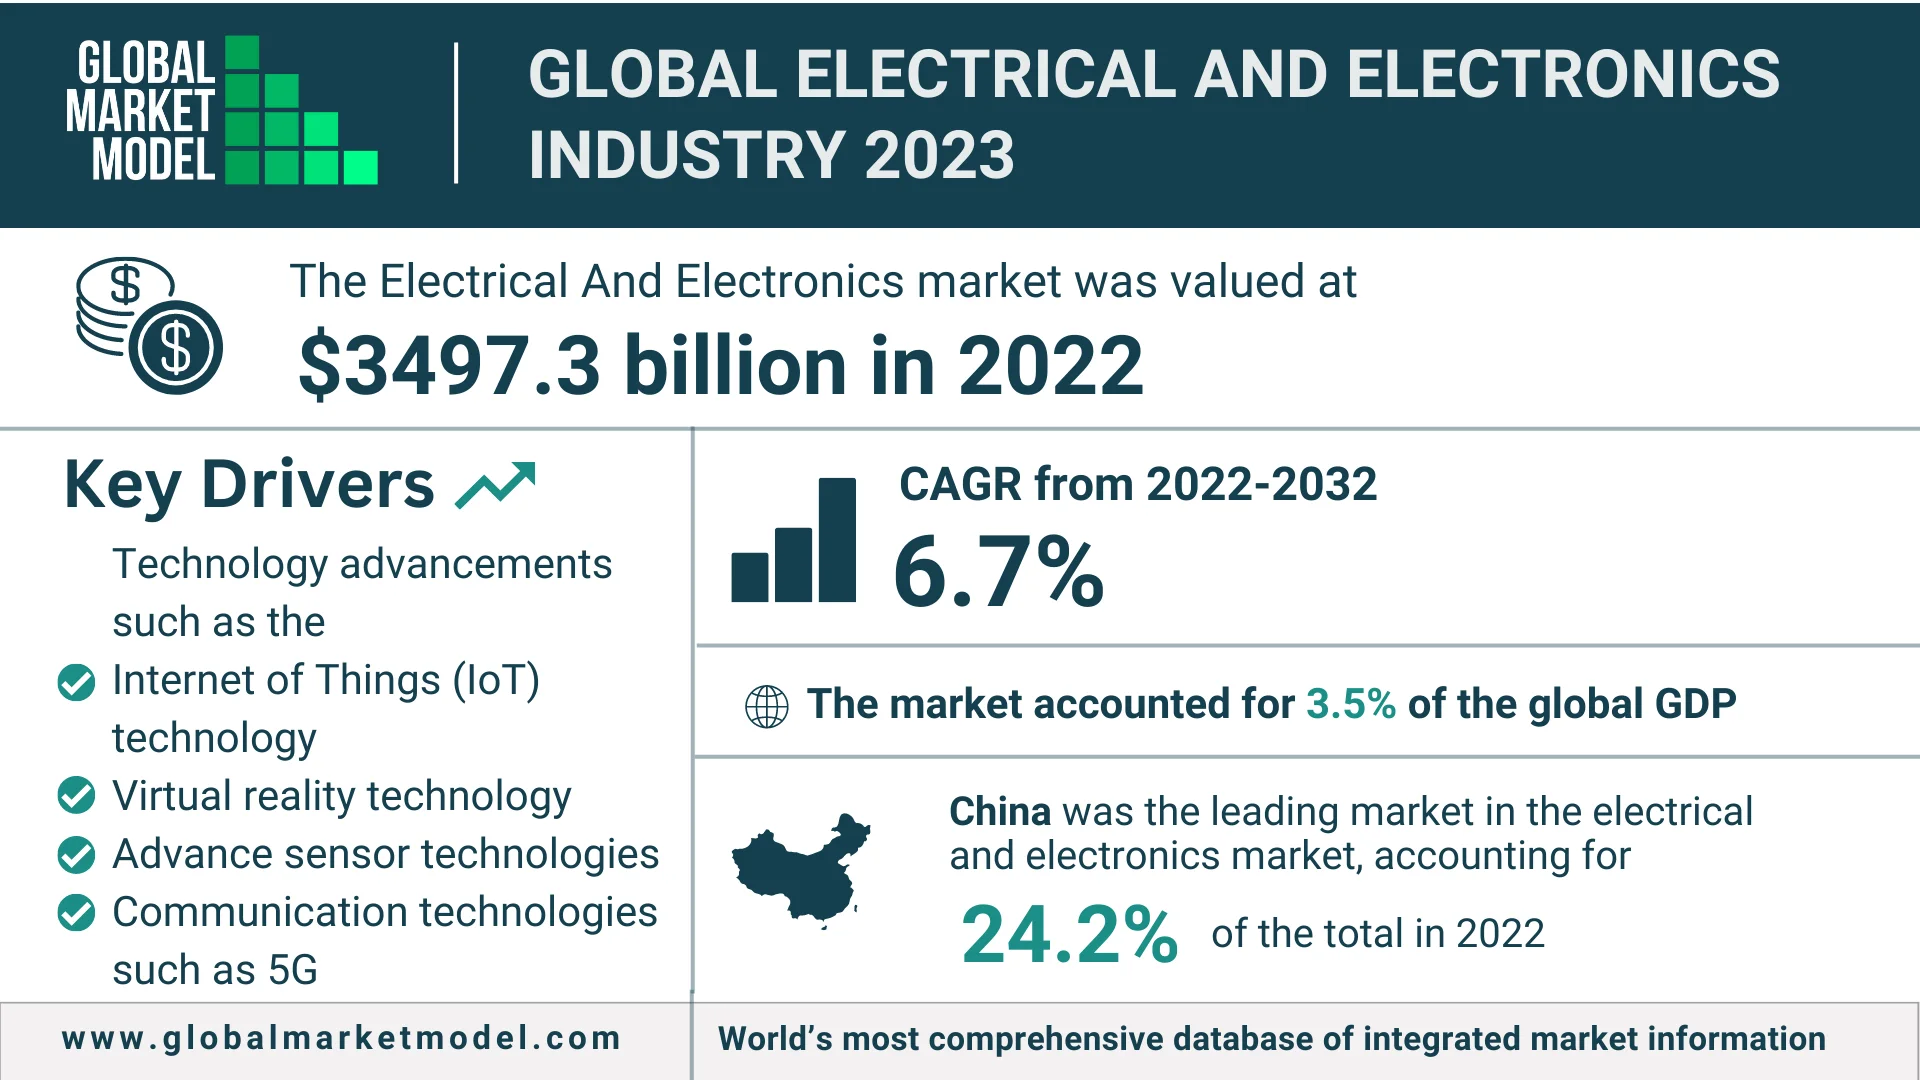 Global Electrical And Electronics Industry 2023